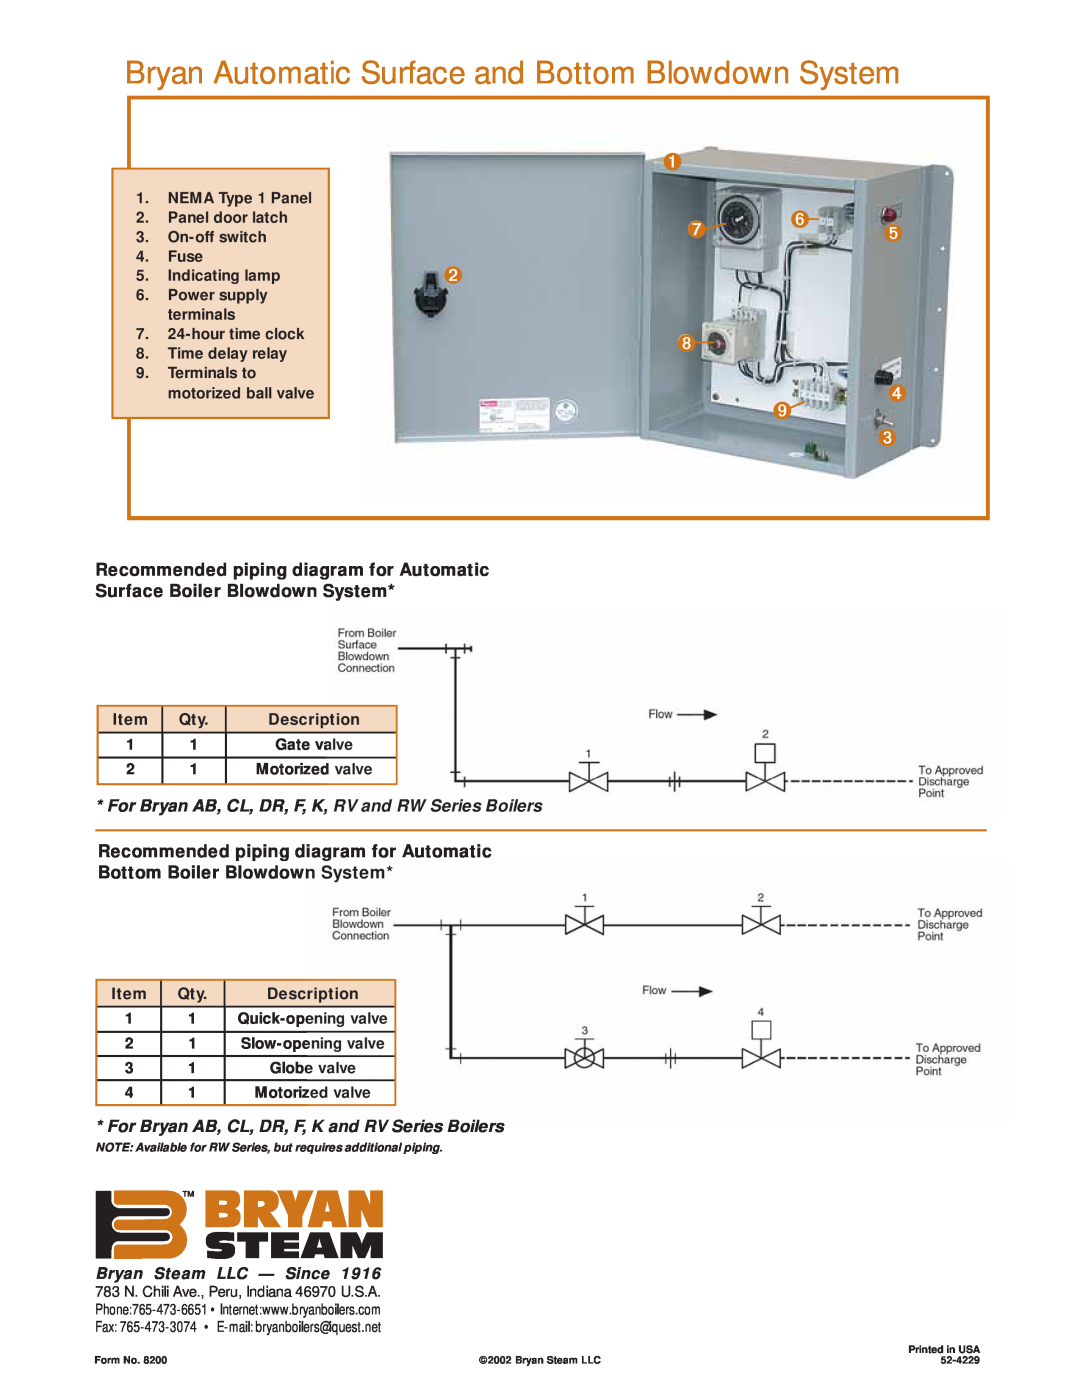 Bryan Boilers F Series Bryan Automatic Surface and Bottom Blowdown System, ➊ ➐ ➏ ➎, ➋ ➑ ➒, Surface Boiler Blowdown System 